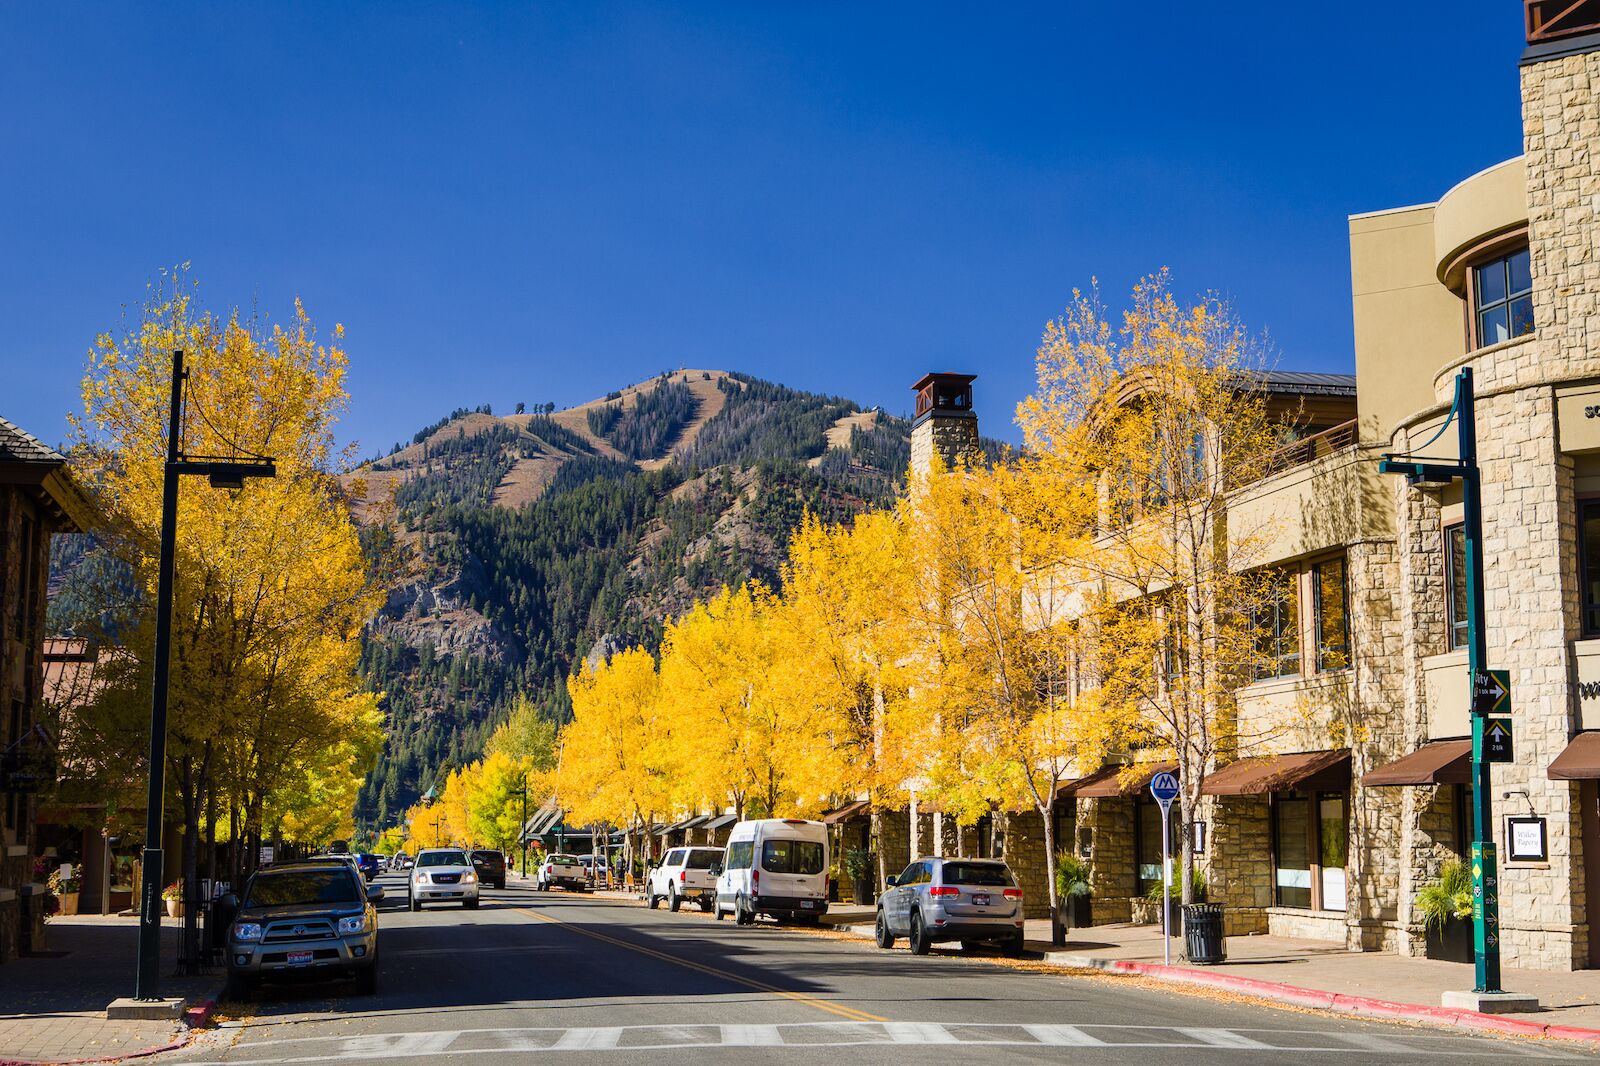 Downtown Sun Valley Idaho on a fall day with leaves turning yellow on the trees and cars parked on the street